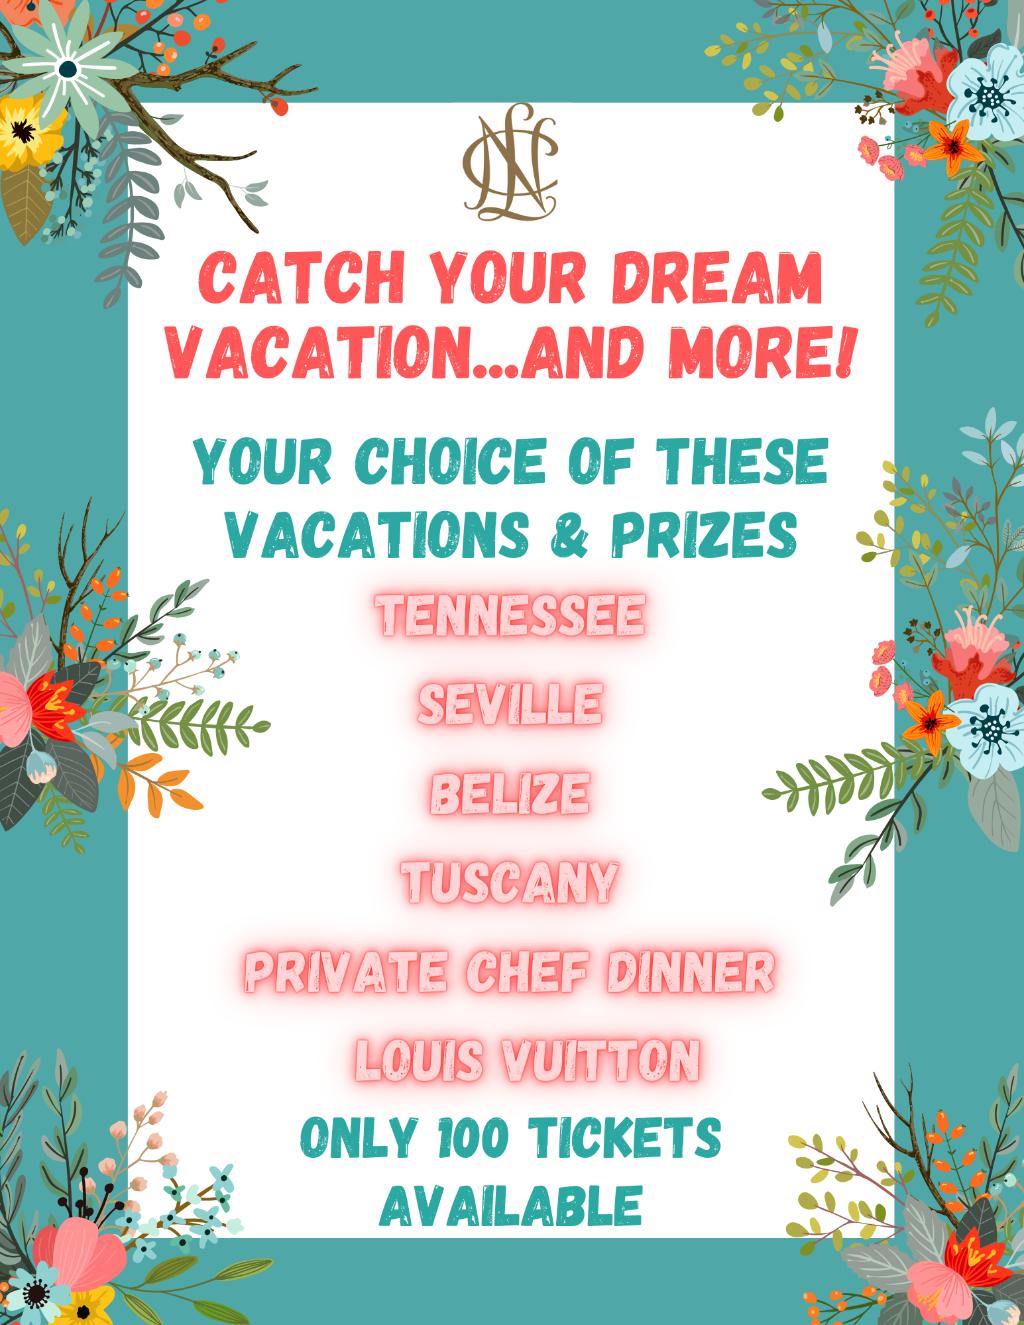 Catch Your Dream Vacation...and More!